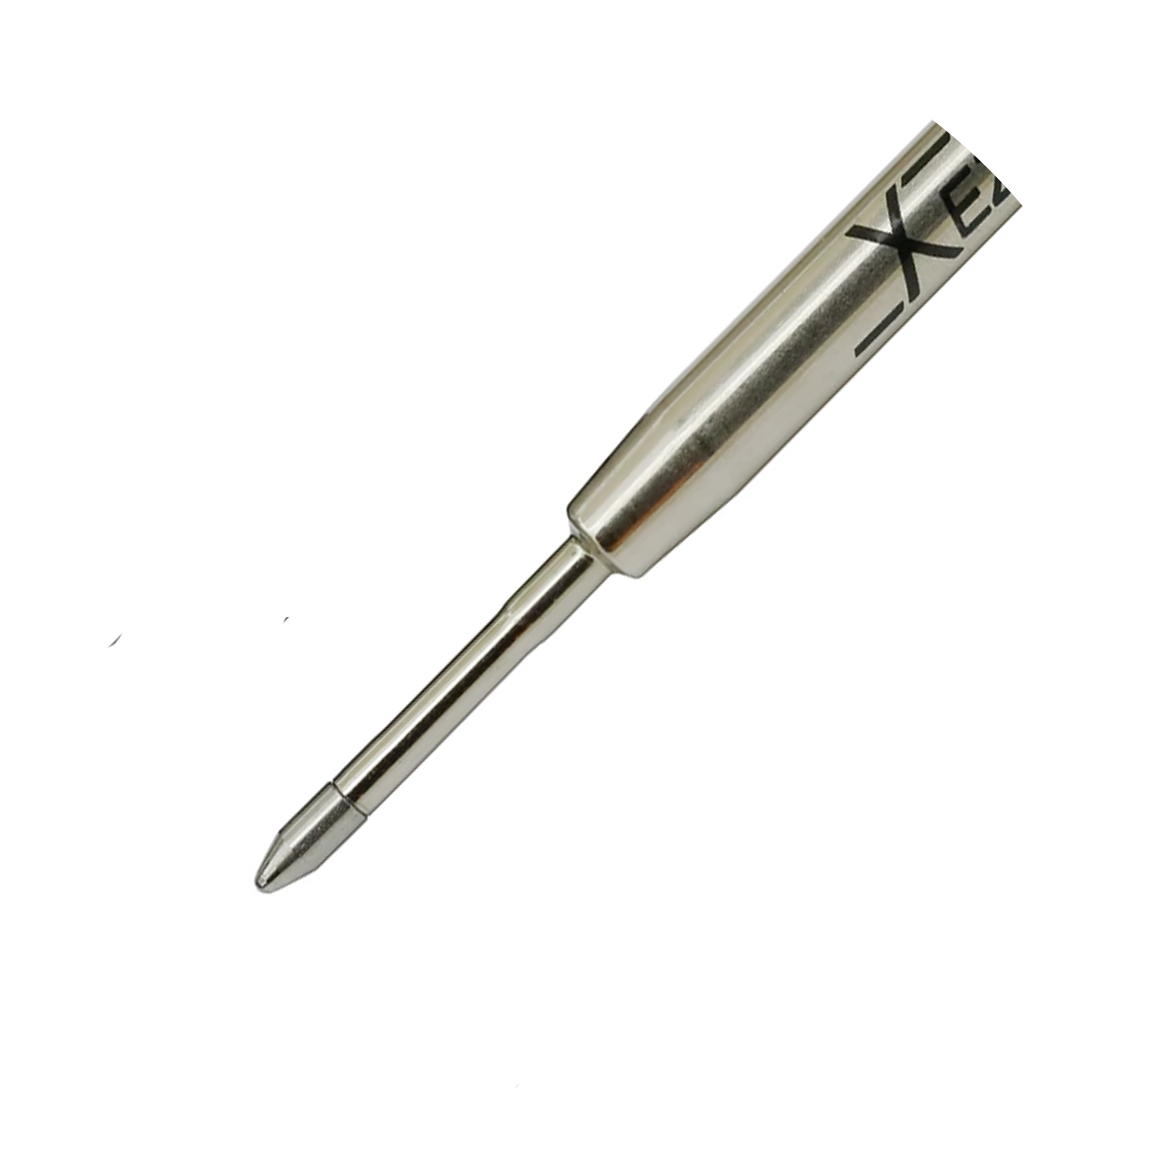 A close-up of the tip of a Xezo ballpoint pen